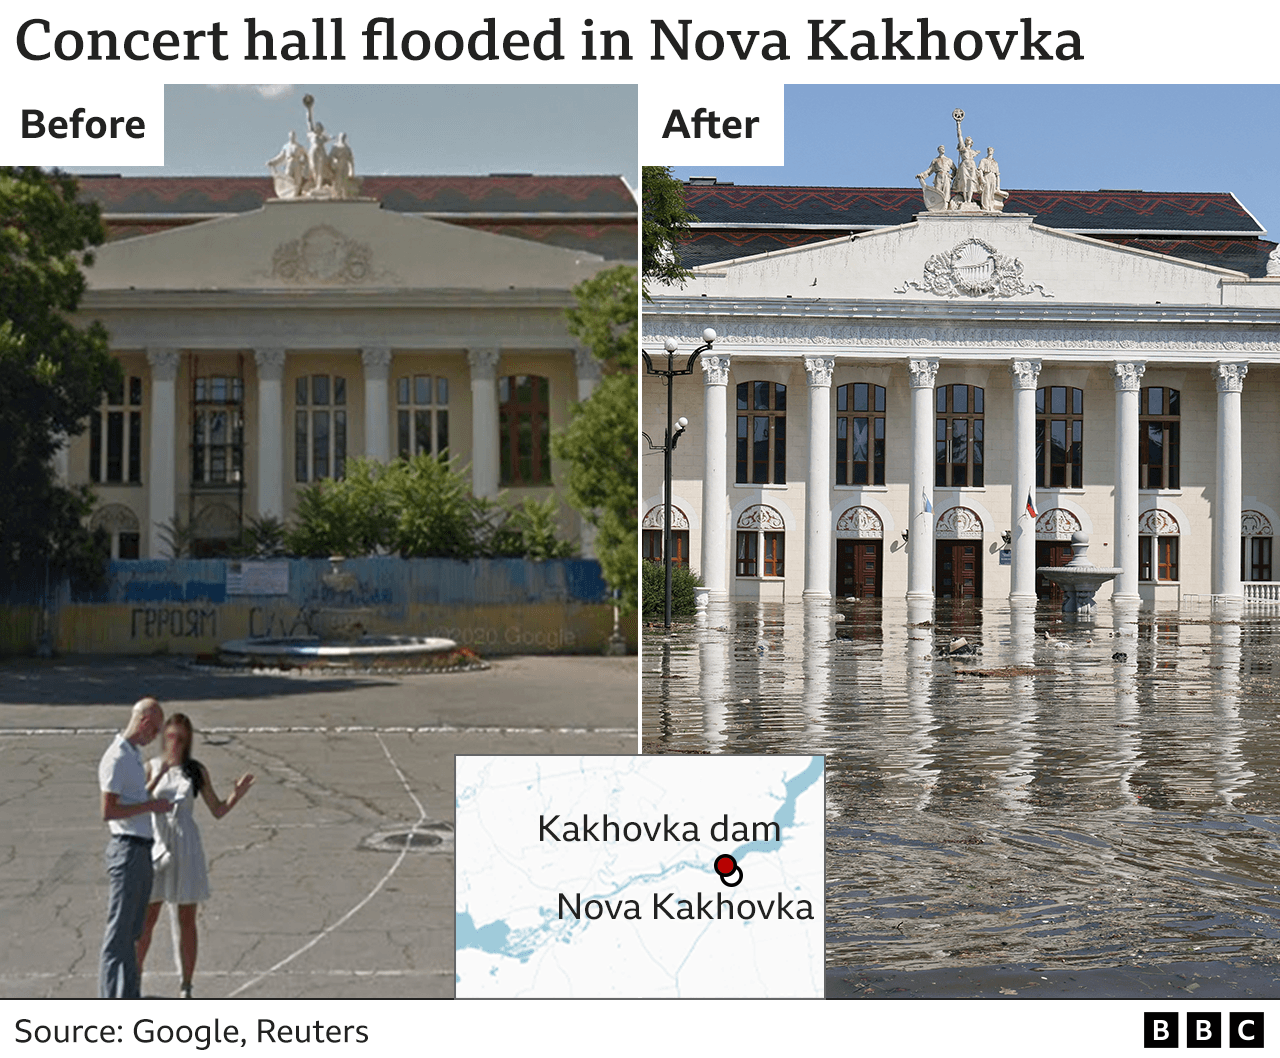 Before and after images showing flooding around Nova Khakovka's concert hall